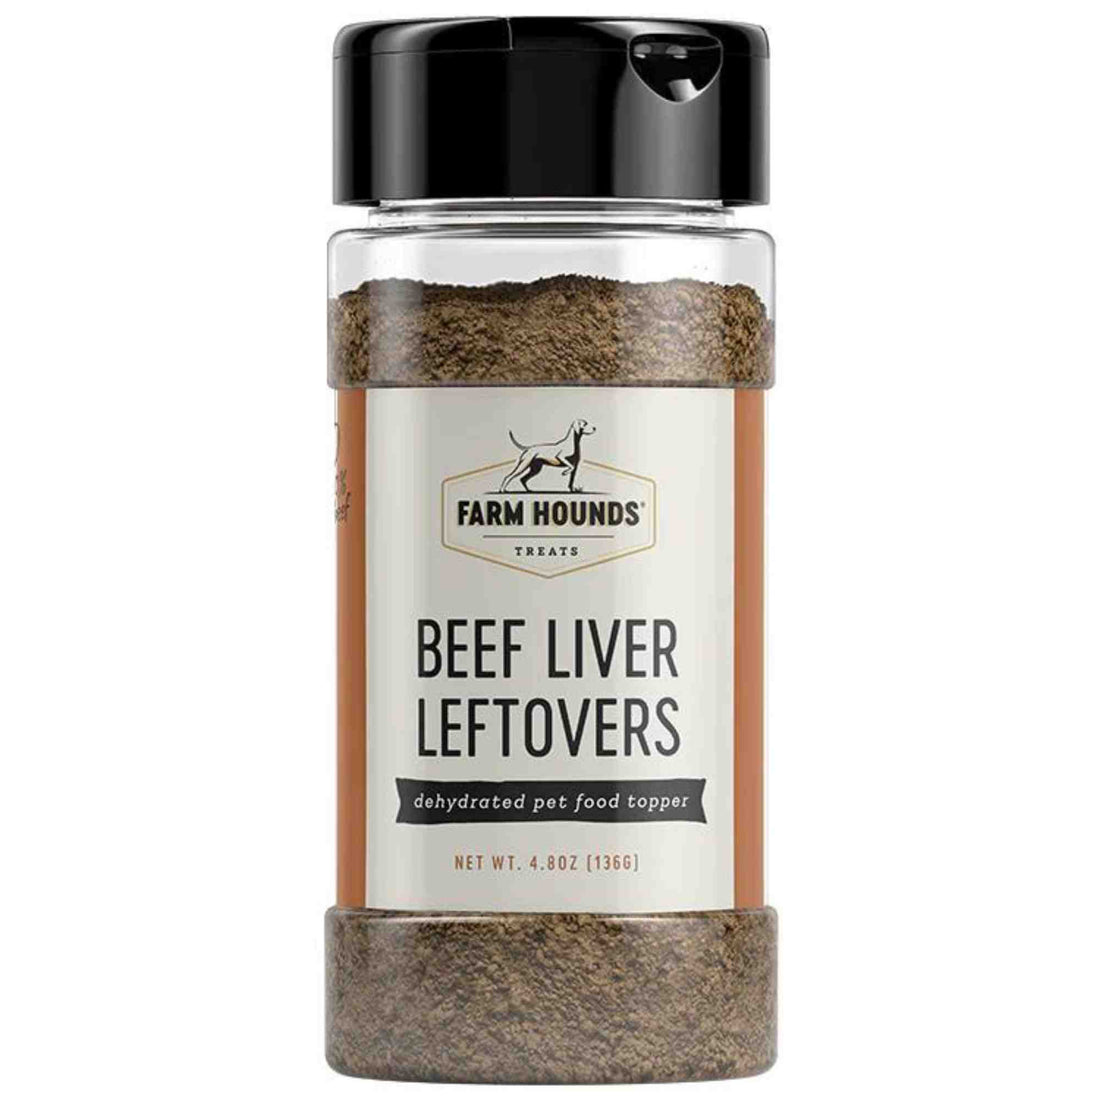 Beef liver leftovers Sprinkles 4.8oz Front Dehydrated Pet Food Topper Farm Hounds